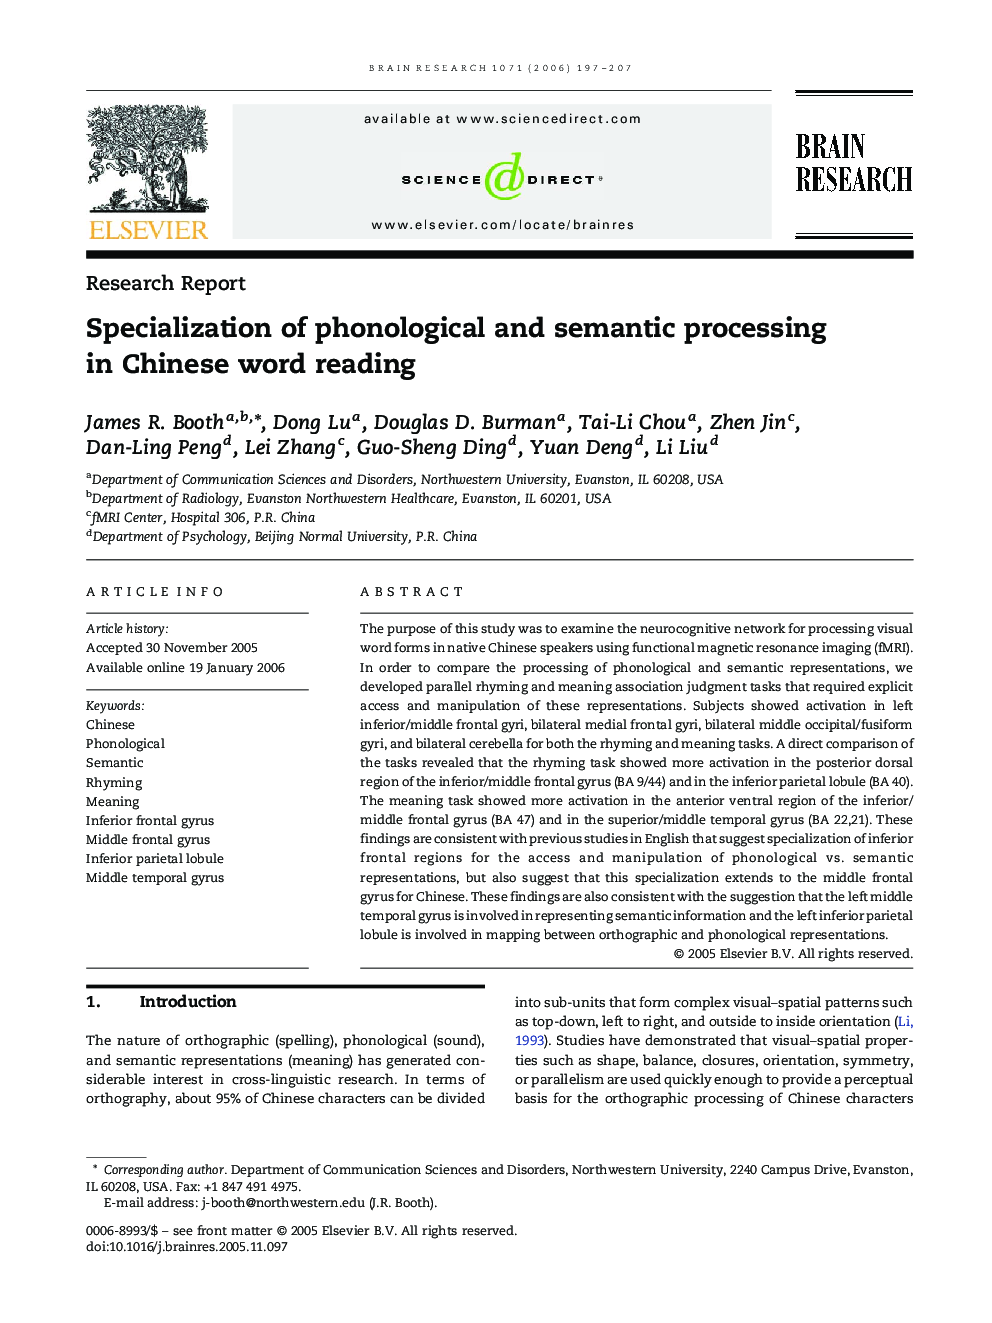 Specialization of phonological and semantic processing in Chinese word reading